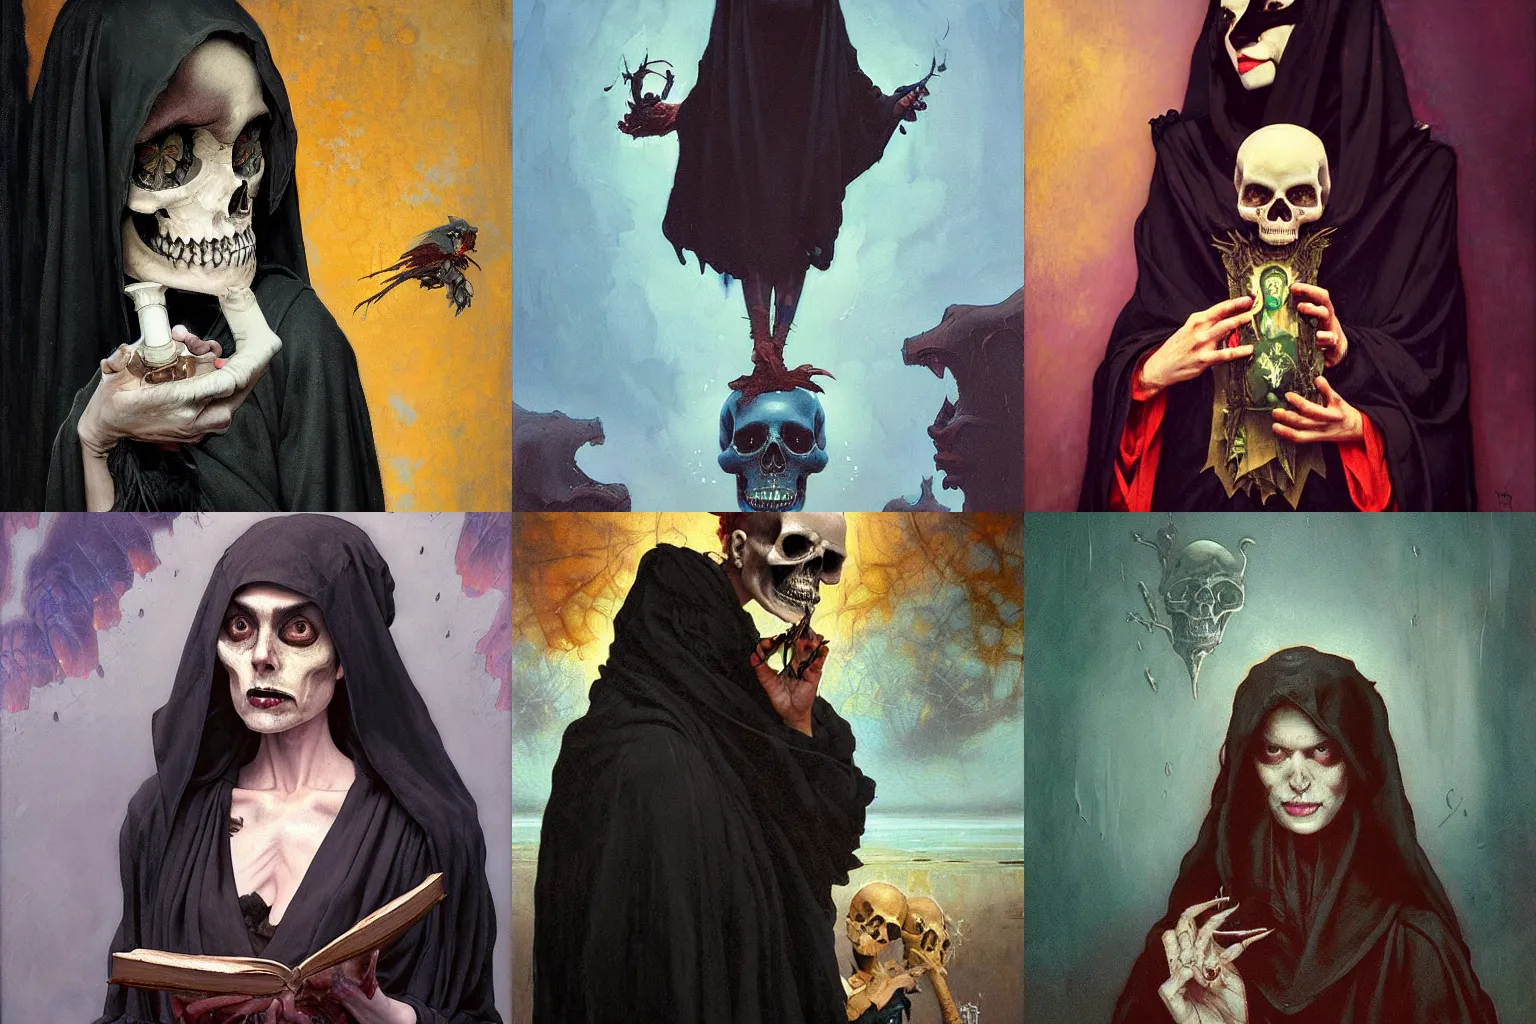 Prompt: An hysterical which stares at a deep black skull with in her hand! She wear a long dark robe. The background is bone fire. Painted by Tony Sandoval, Enki Bilal, Caravaggio, Greg rutkowski, Sachin Teng, Thomas Kindkade, Alphonse Mucha, Norman Rockwell, Tom Bagshaw. Oil painting.